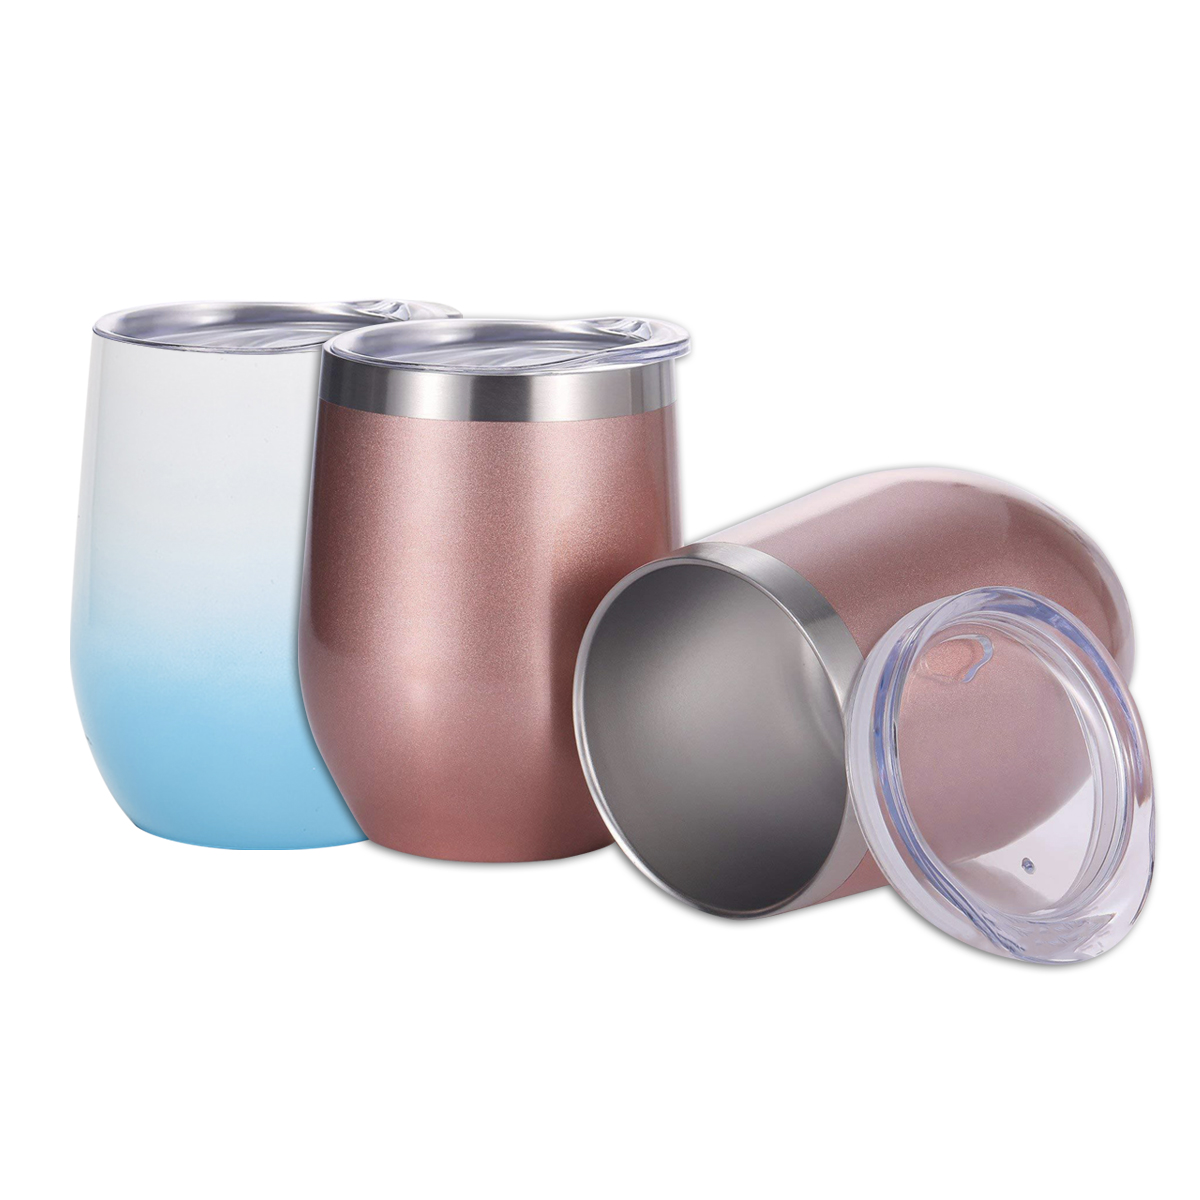 Eggy Double Wall Stainless Steel Mug with Lid (350ml)